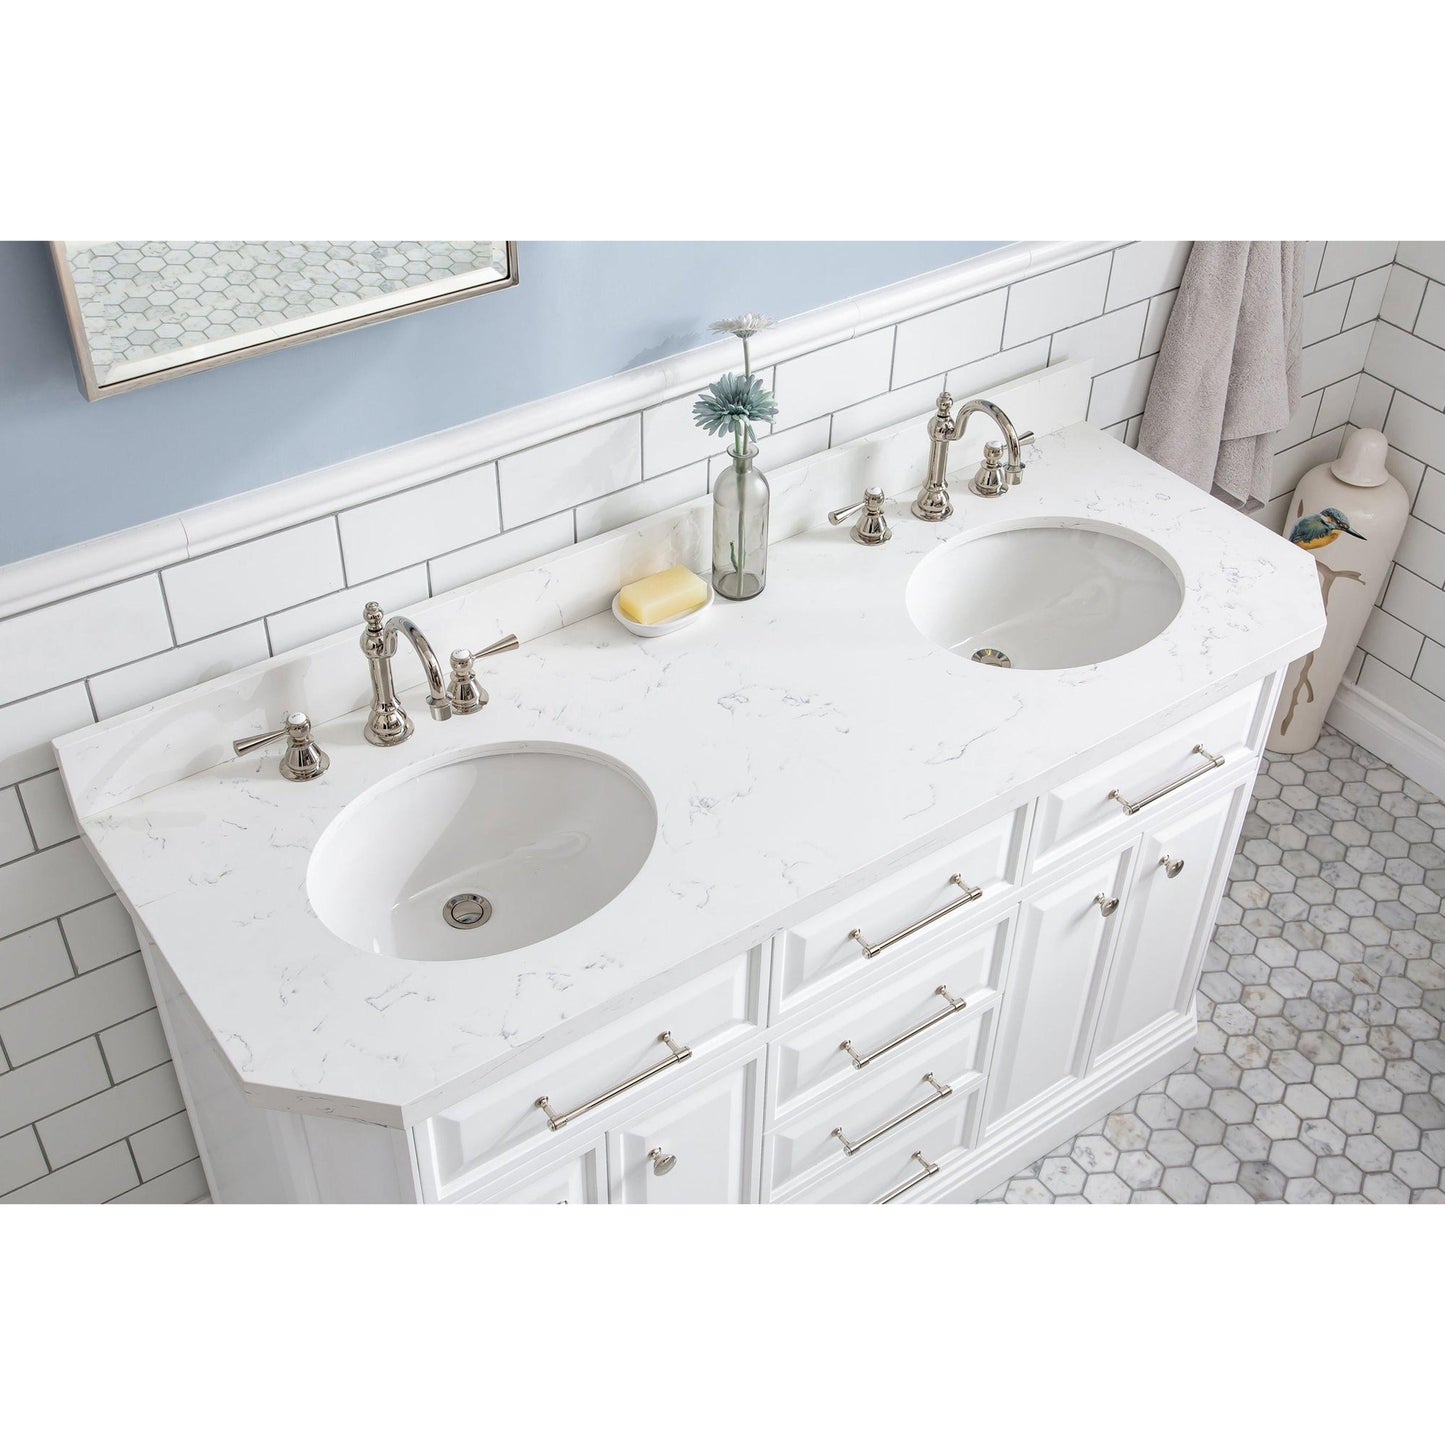 Water Creation Palace 60" Quartz Carrara Pure White Bathroom Vanity Set With Hardware And F2-0012 Faucets, Mirror in Polished Nickel (PVD) Finish